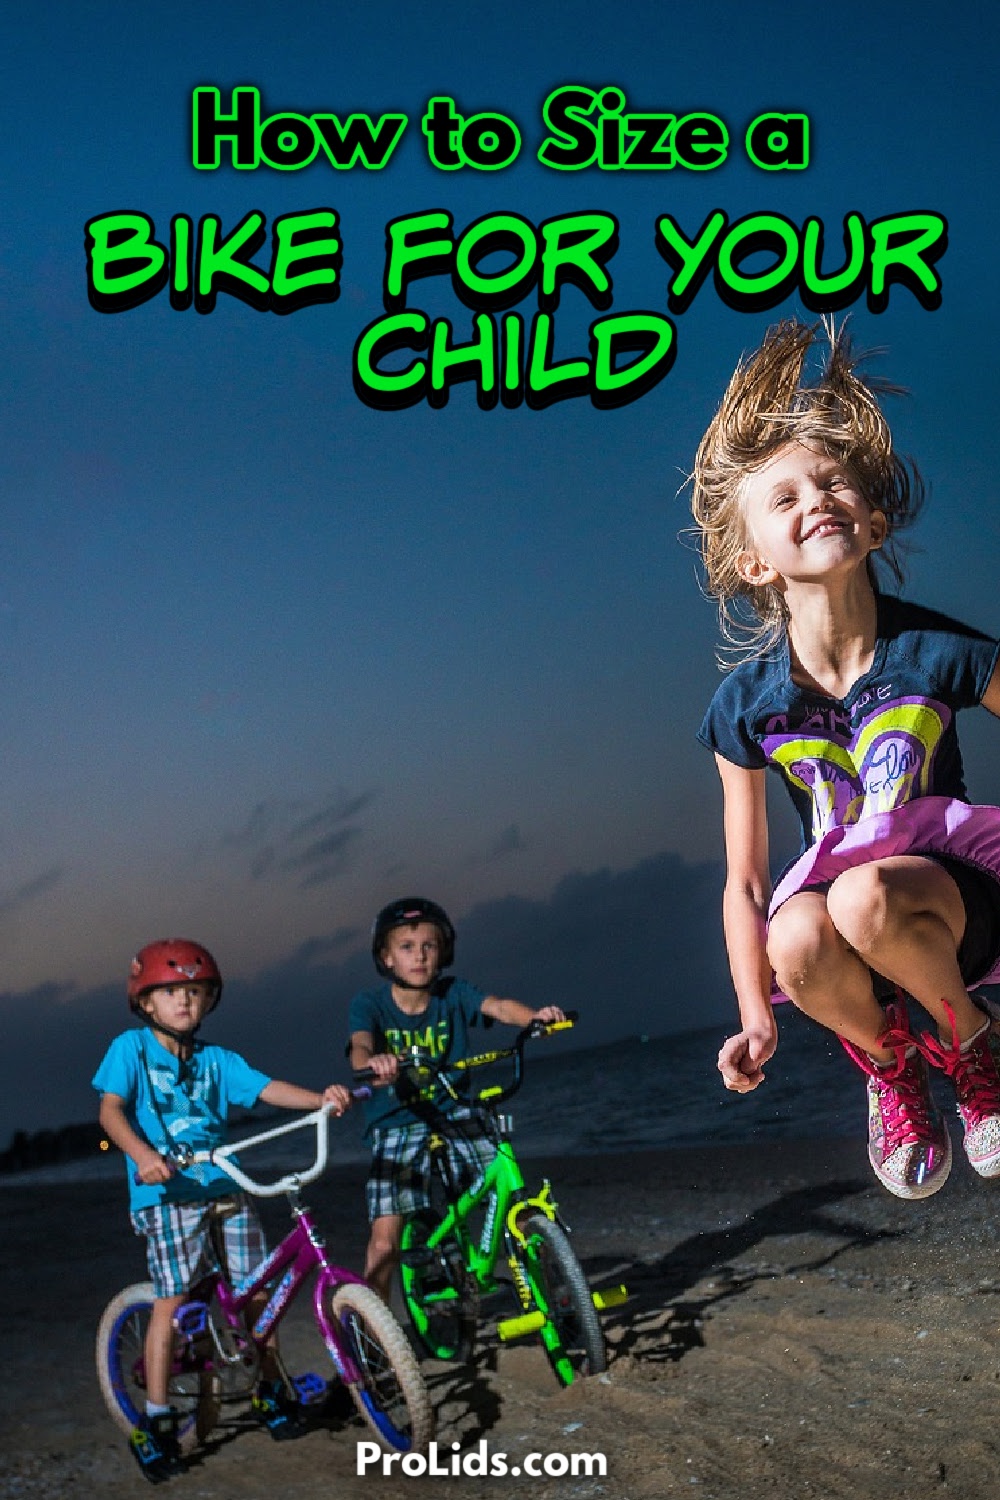 Learning how to size a bike for your child helps keep them safer while riding and your mind at ease as a parent.